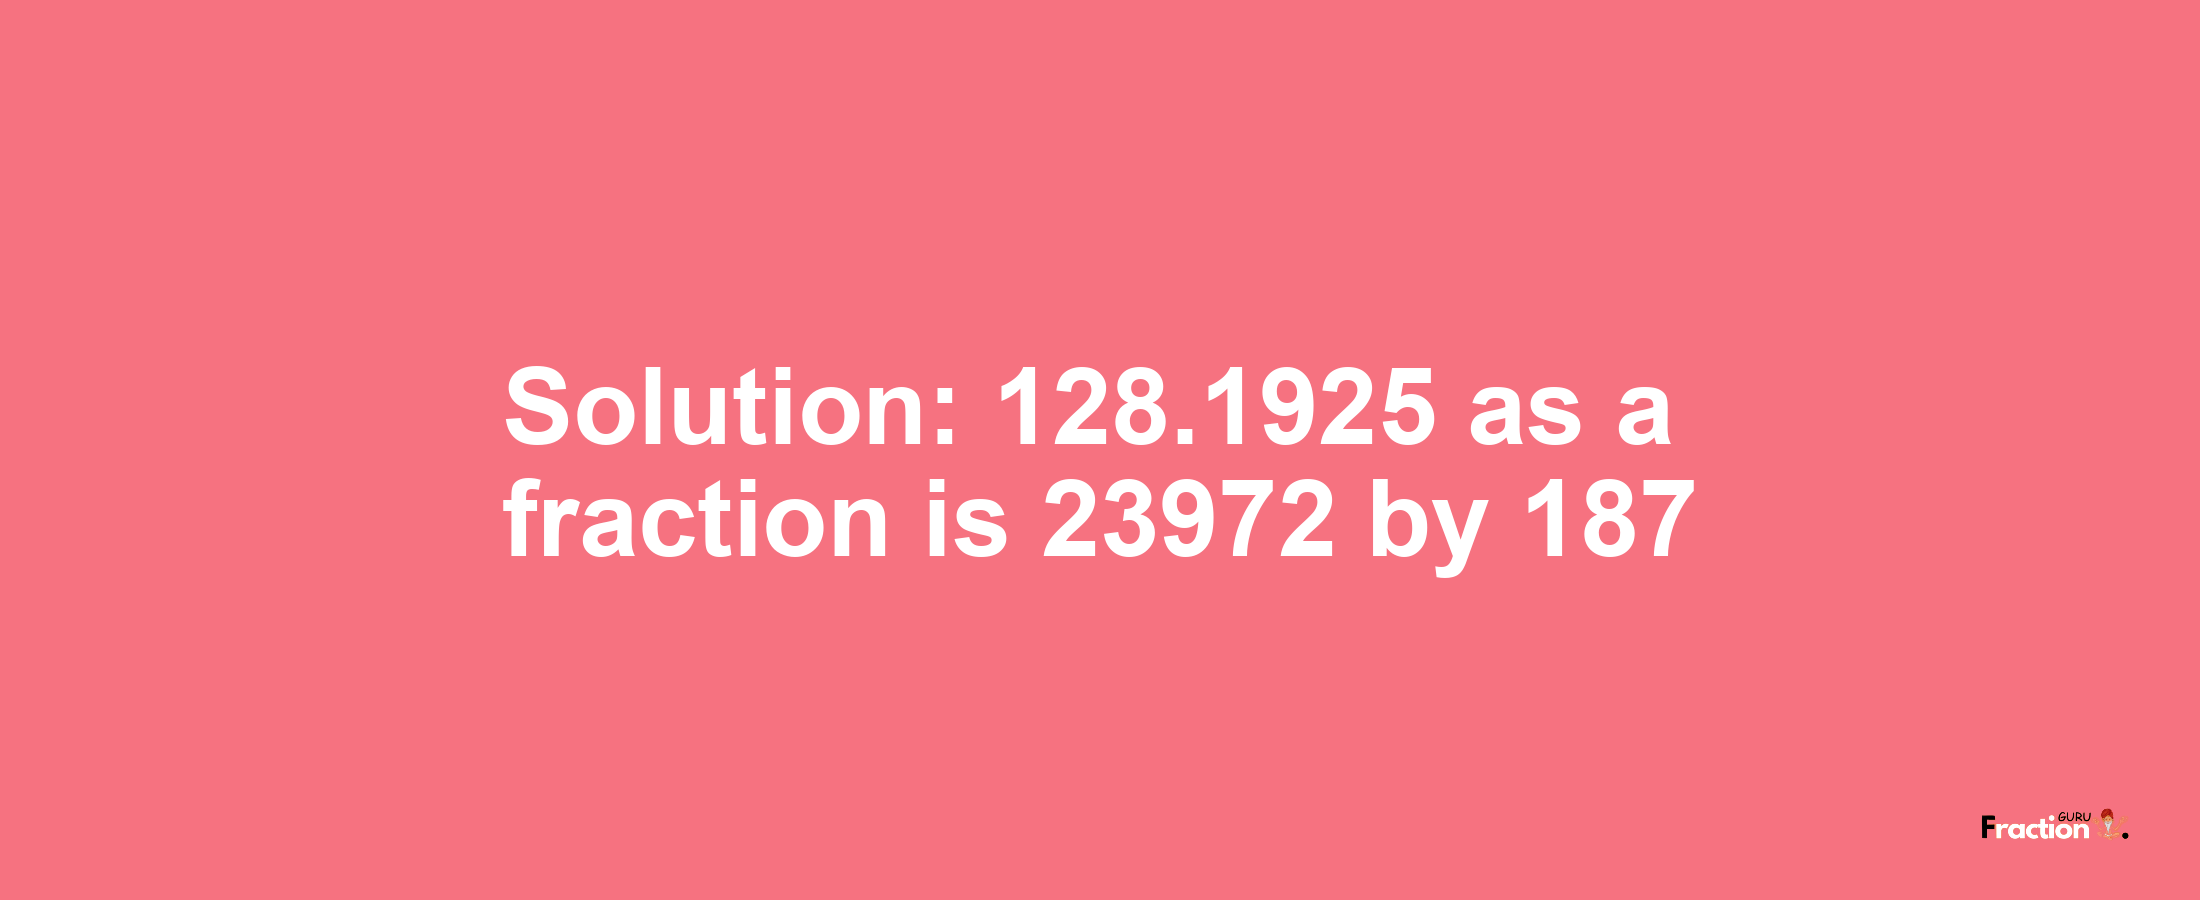 Solution:128.1925 as a fraction is 23972/187